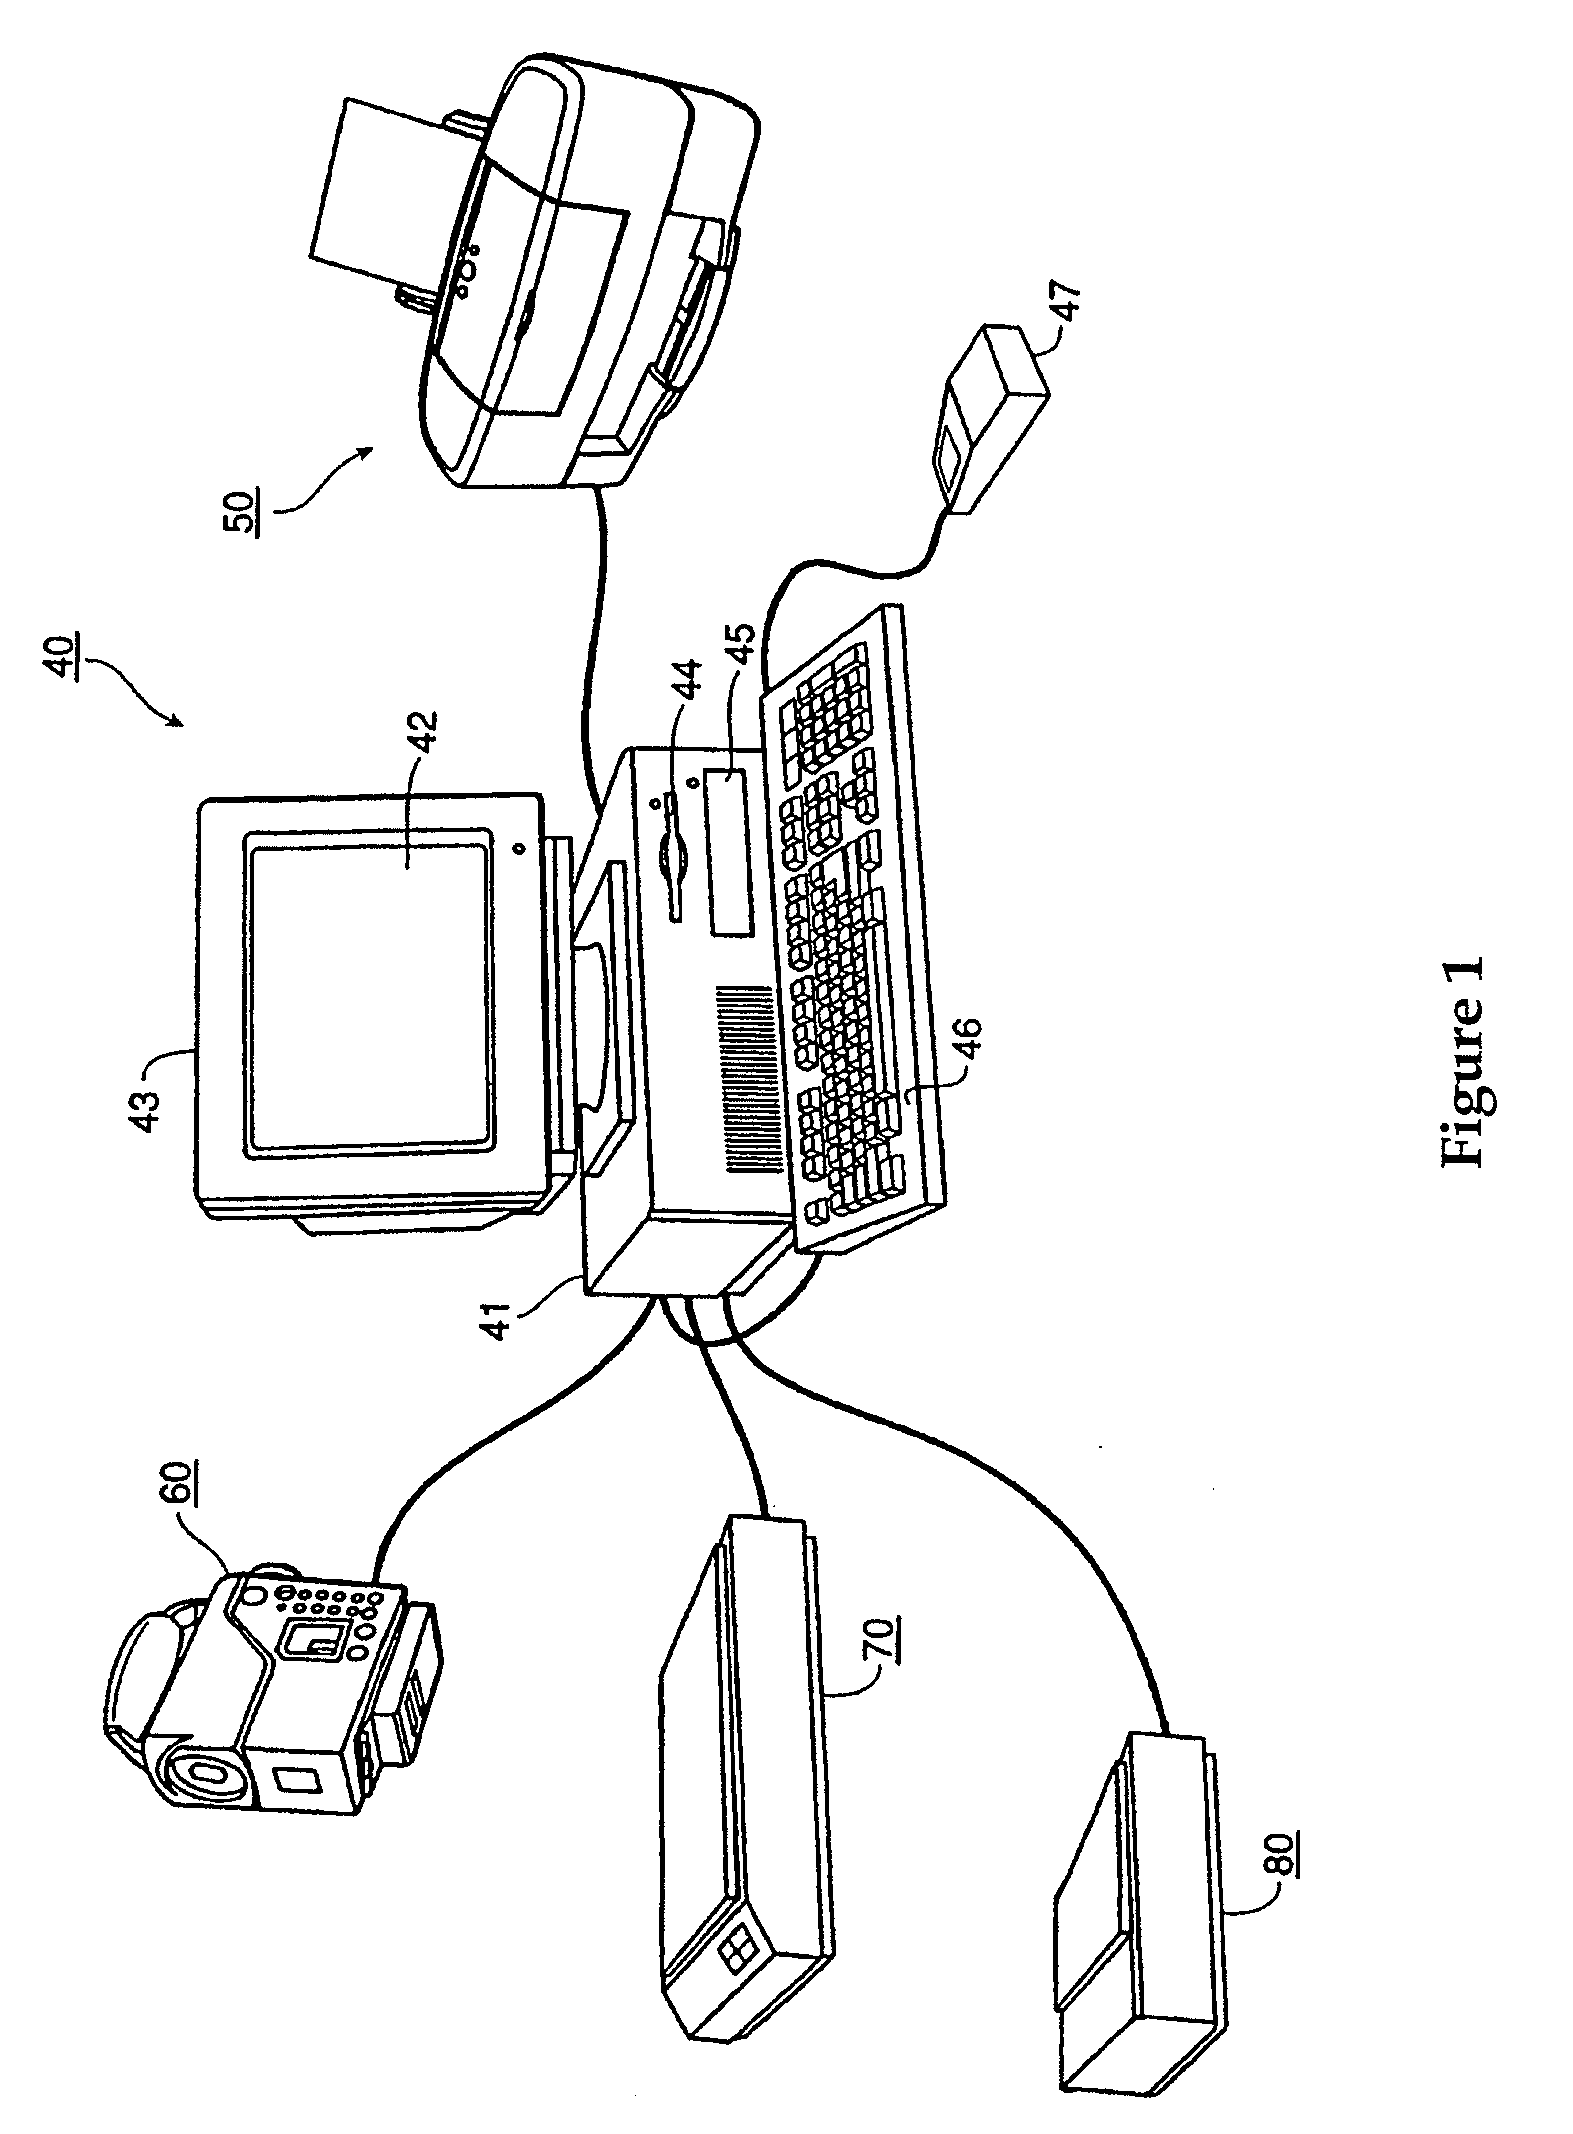 Generating a device independent interim connection space for spectral data